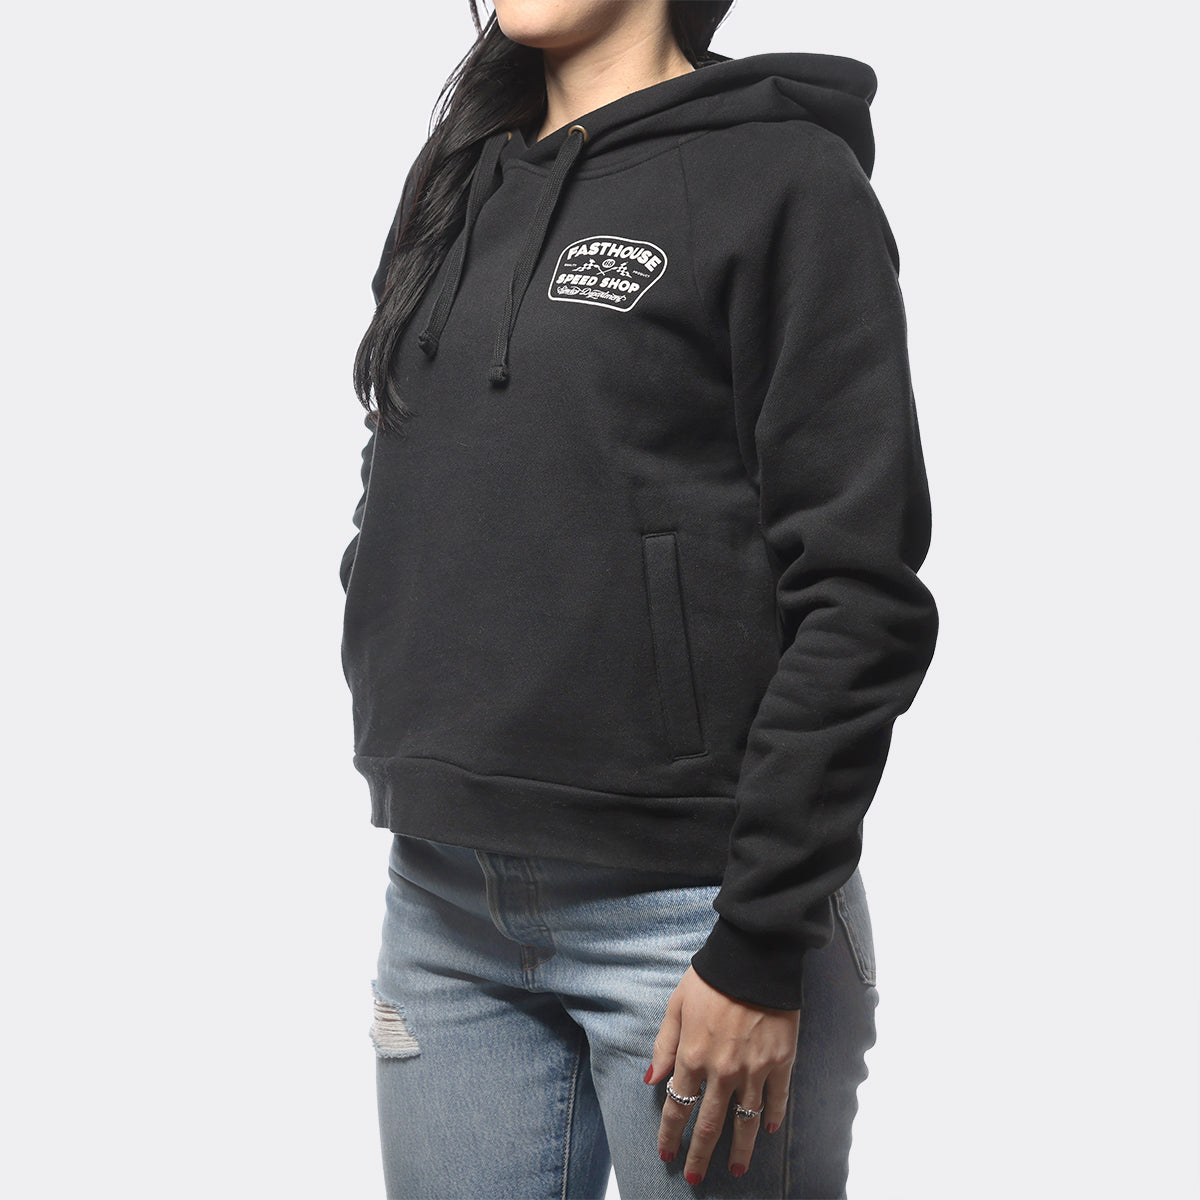 Wedged Women's Hooded Pullover - Black